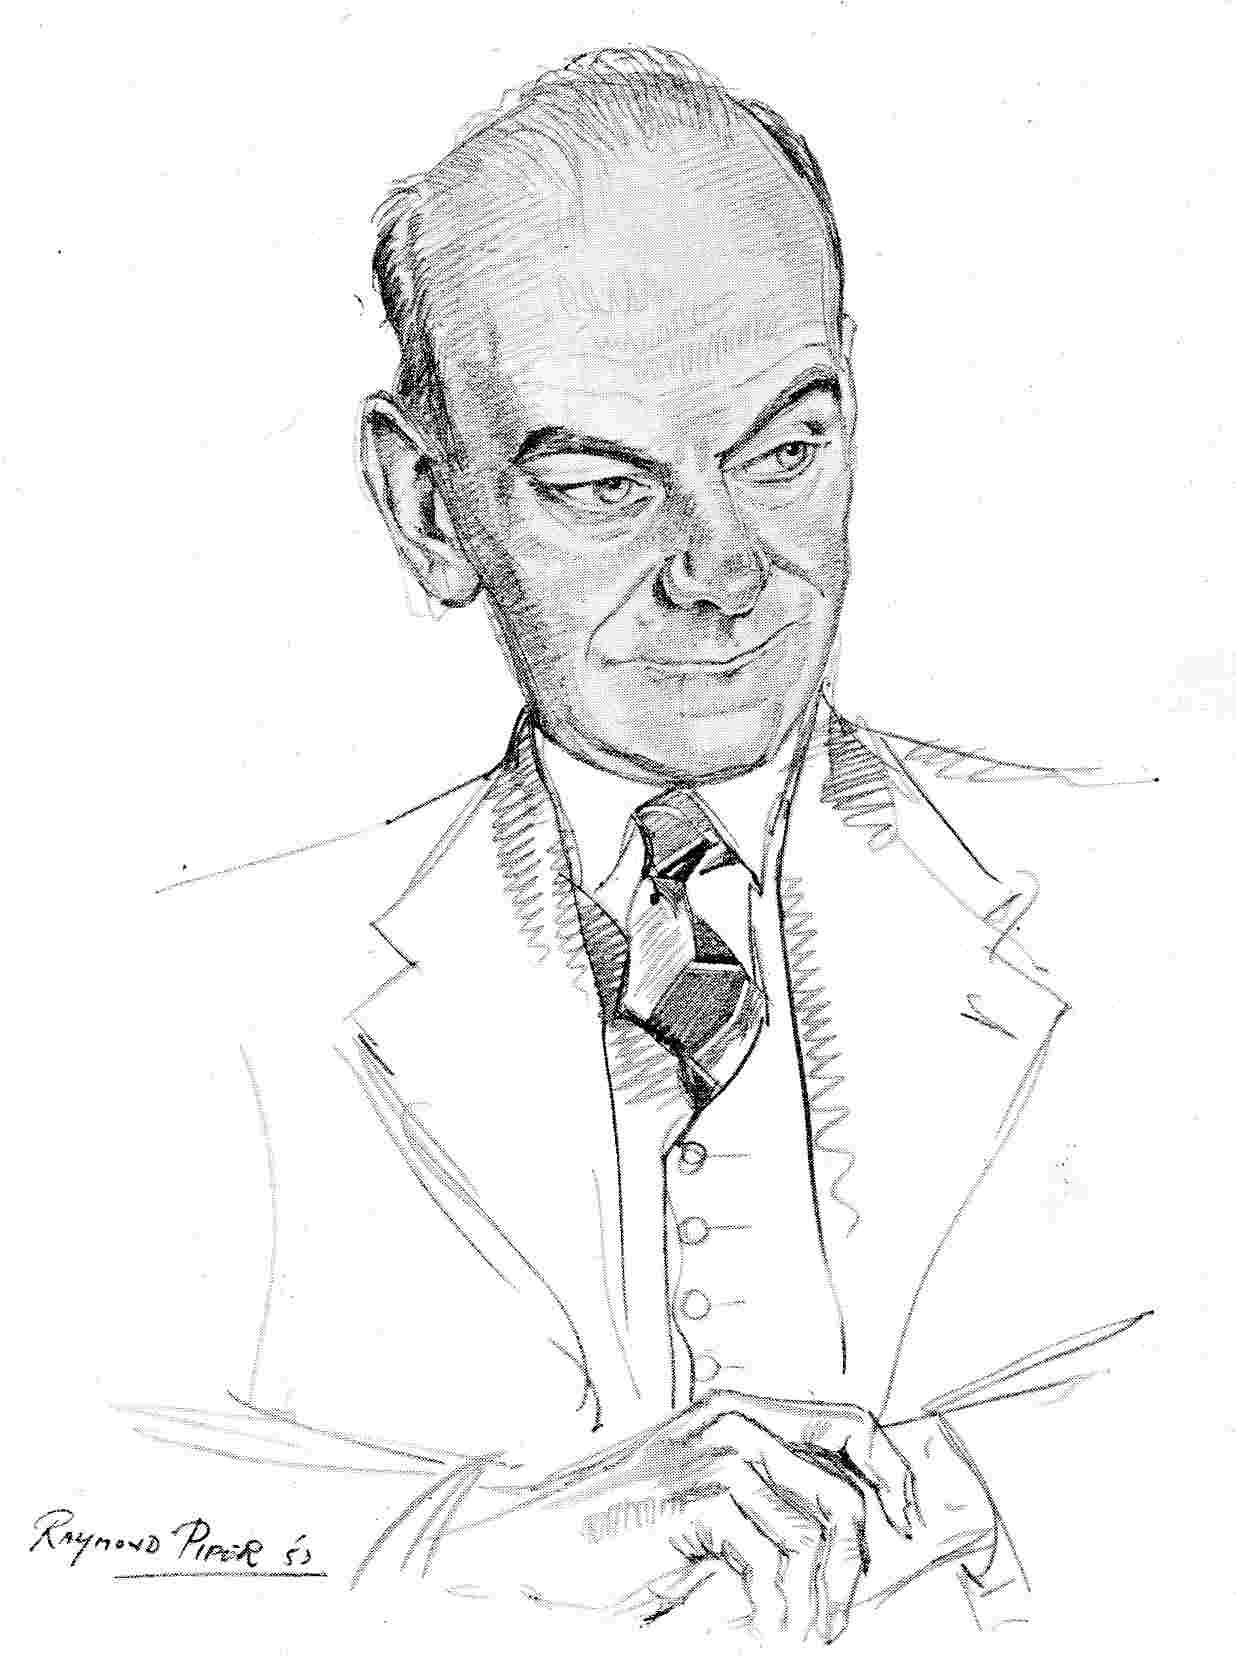 Raymond Piper's sketch of David Curry, 1953